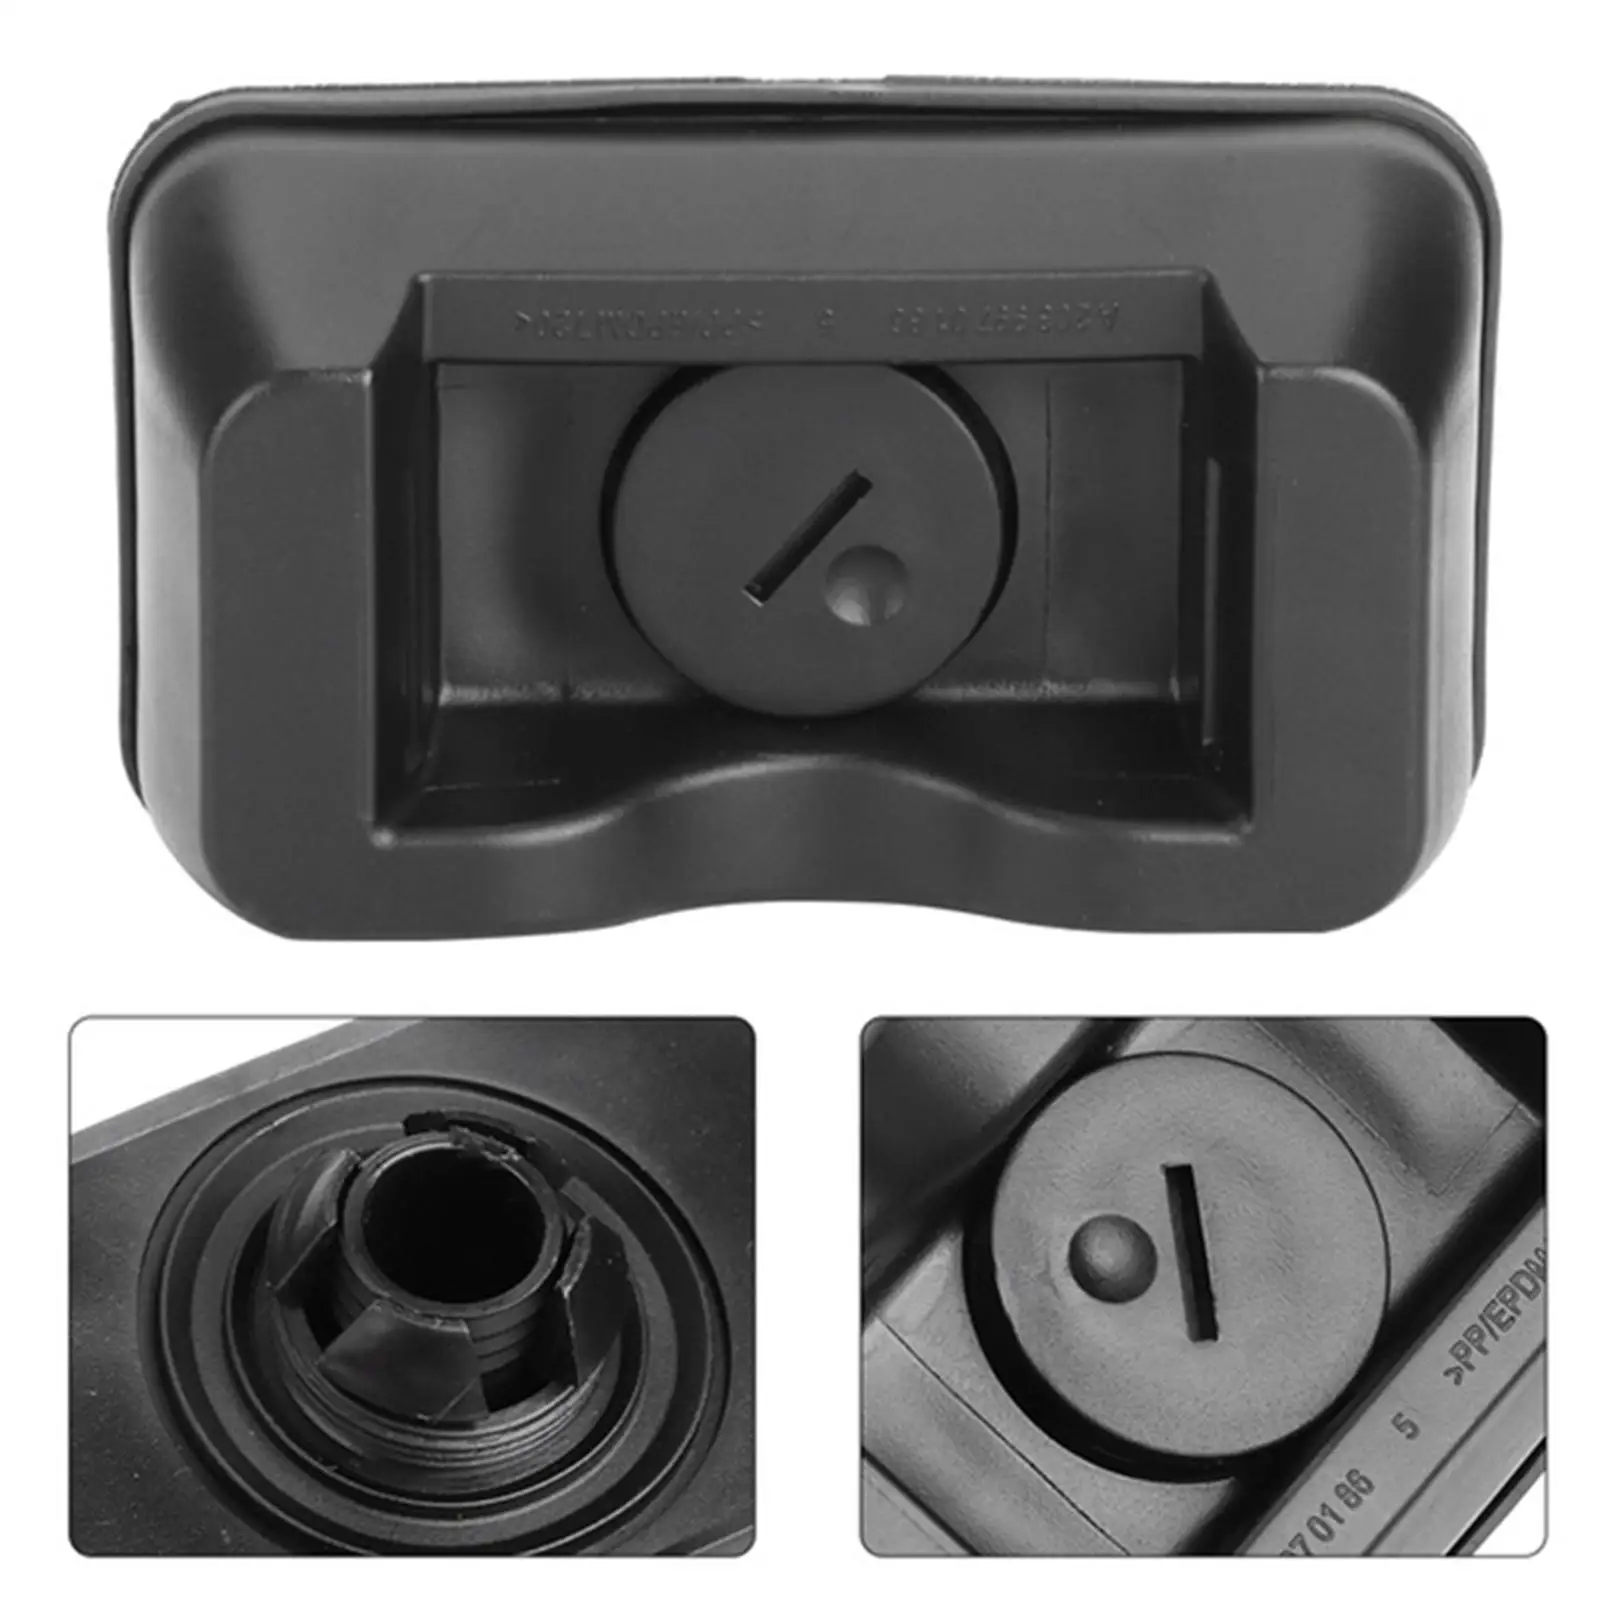 Jack Pad Point Support Block A2039970186 for Mercedes-benz E Class W211